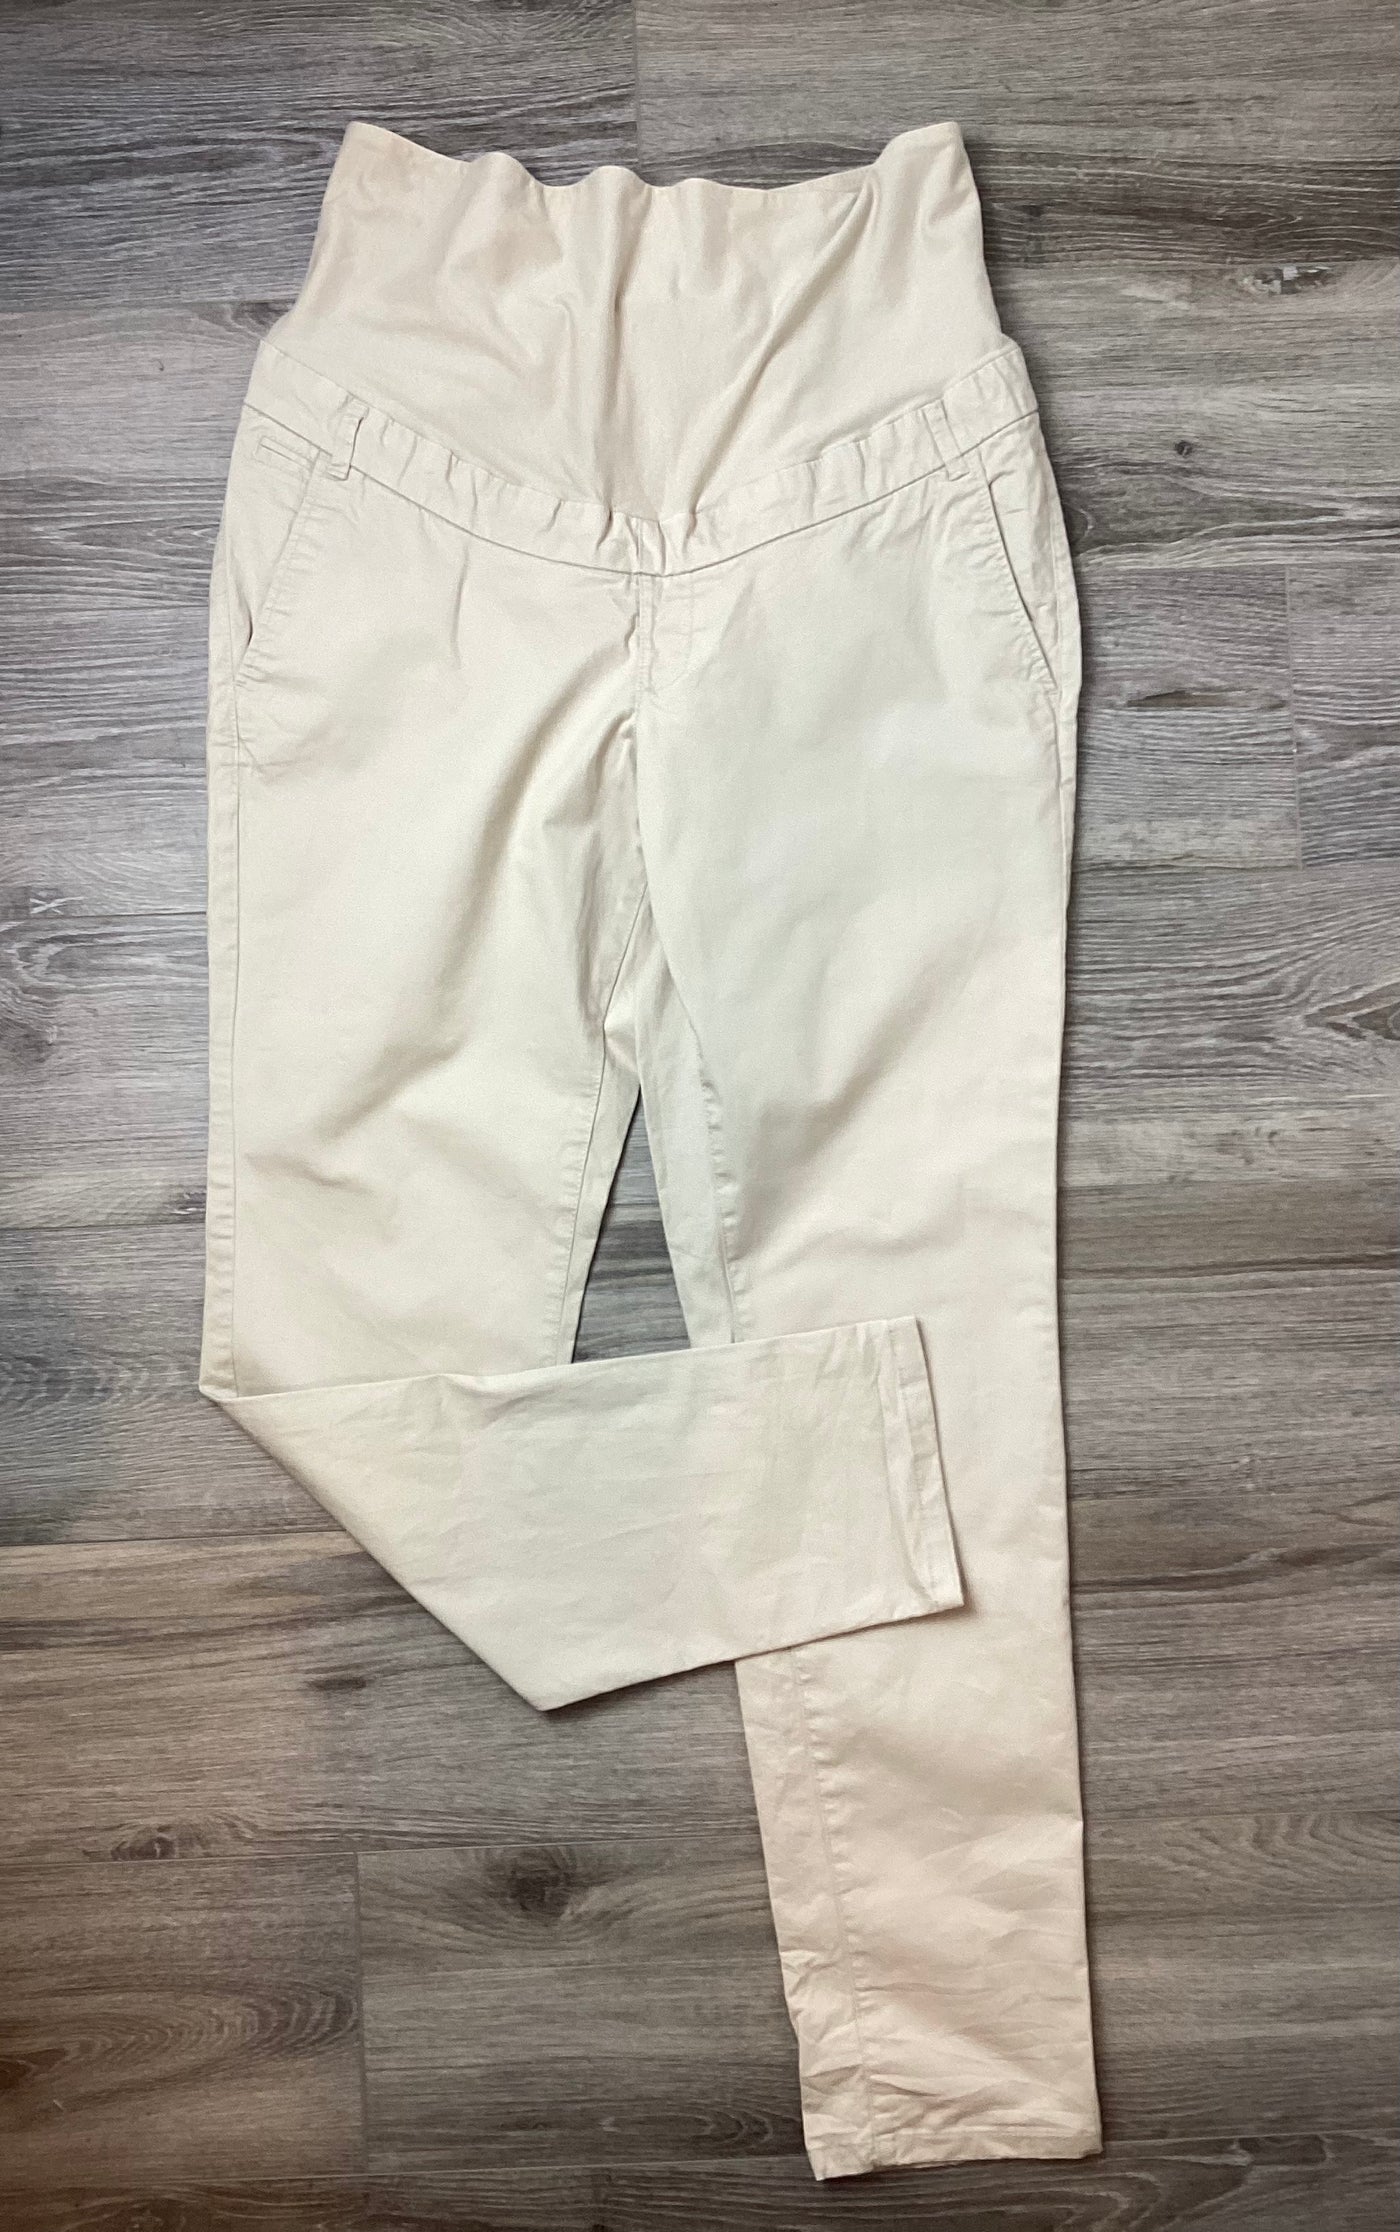 H&M Mama Stone overbump chino trousers - Size EUR 44 (Approx UK 14/16)